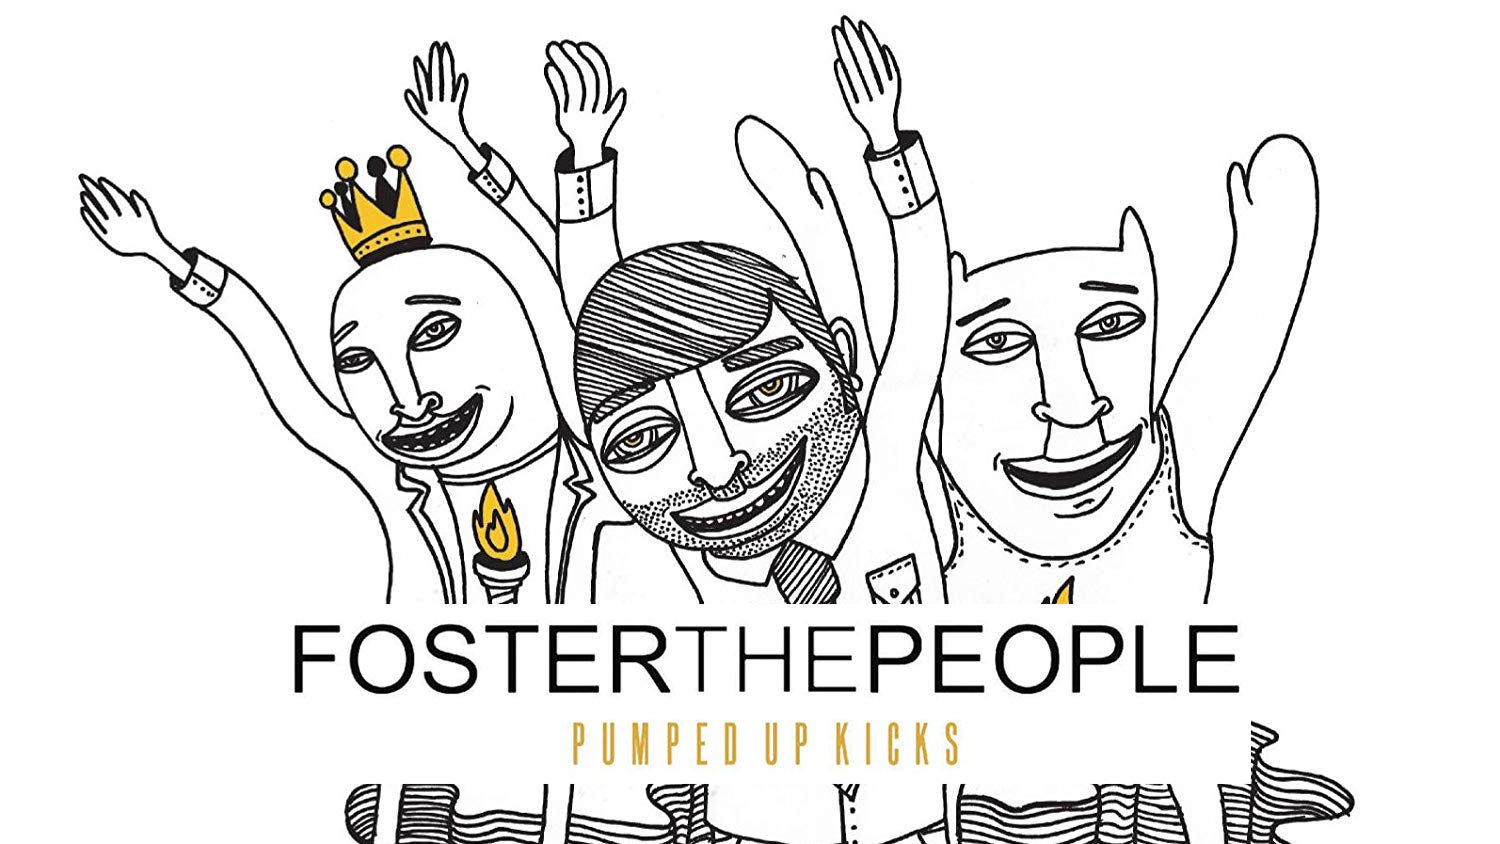 Pumped Up Kicks-Foster the People